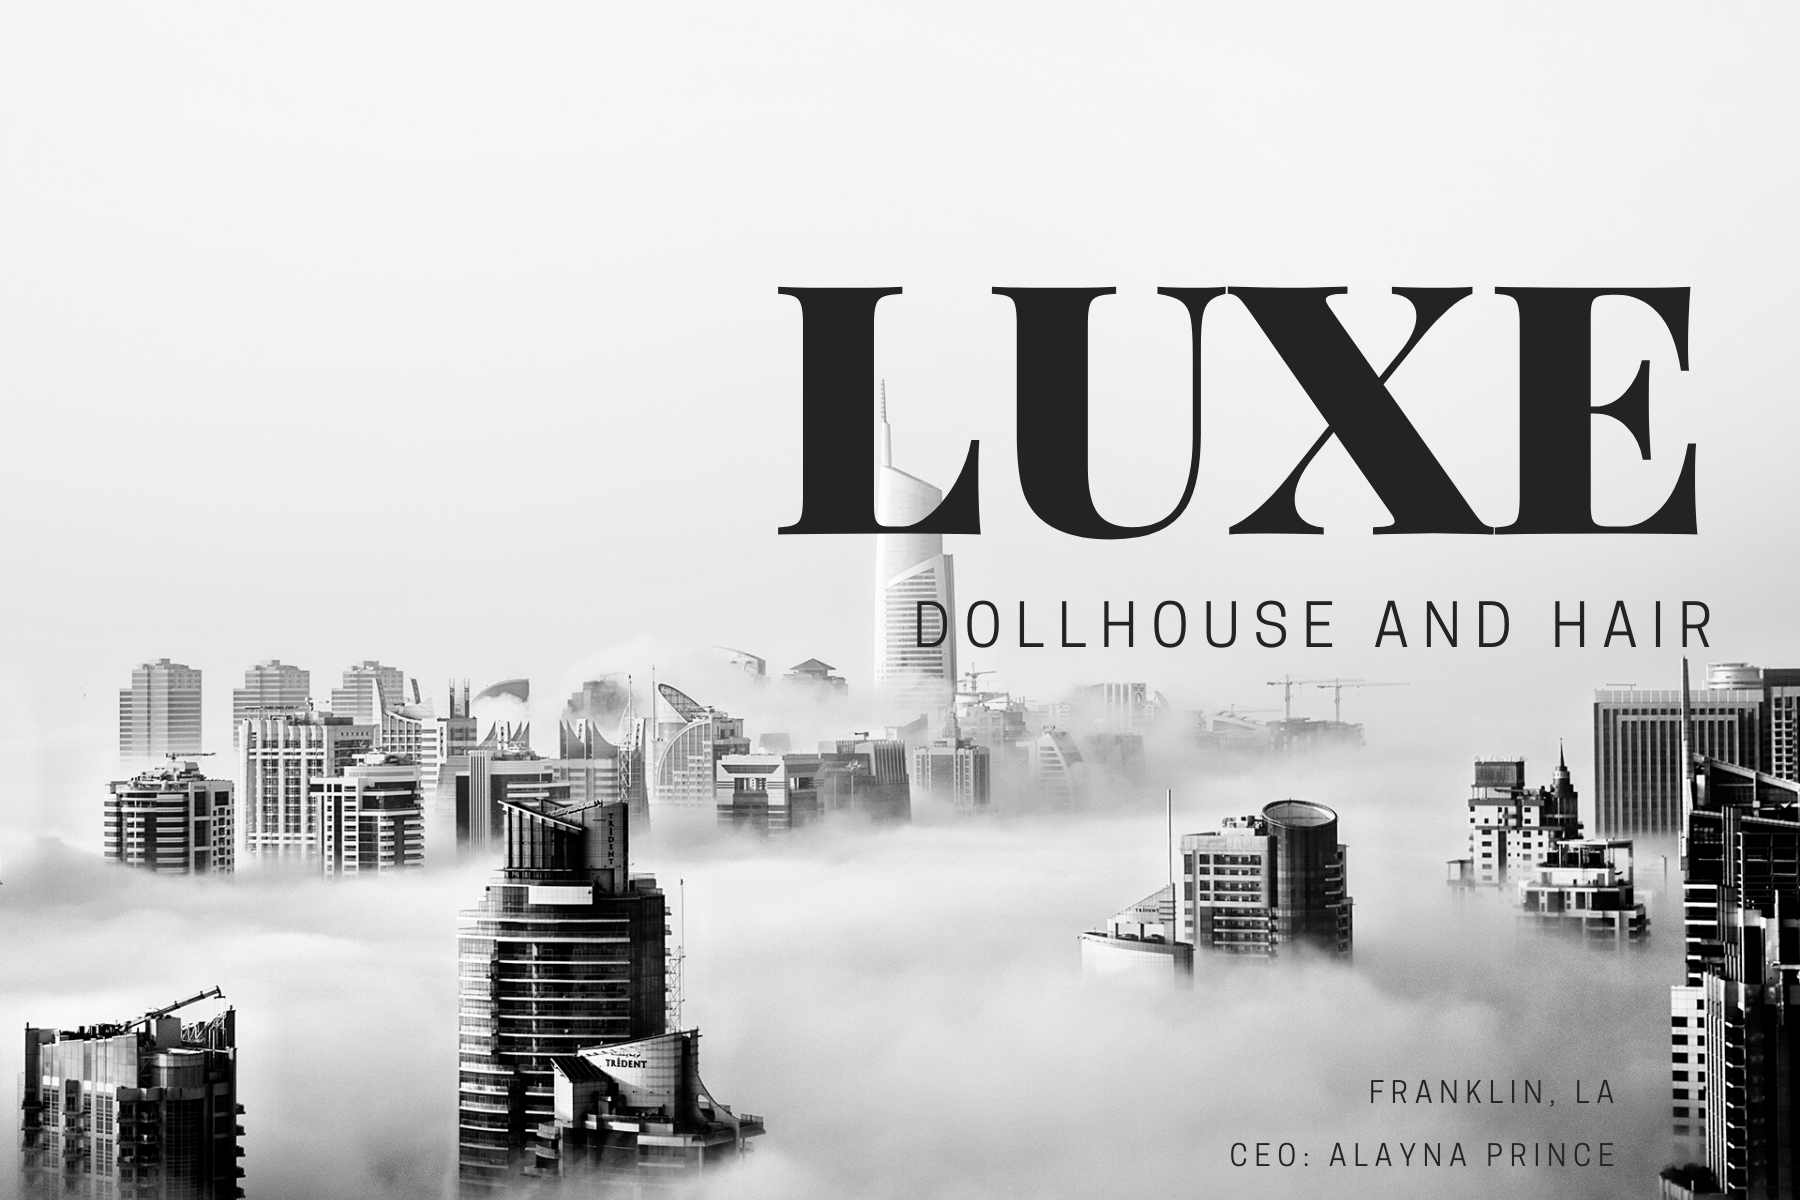 Luxe Dollhouse and Hair